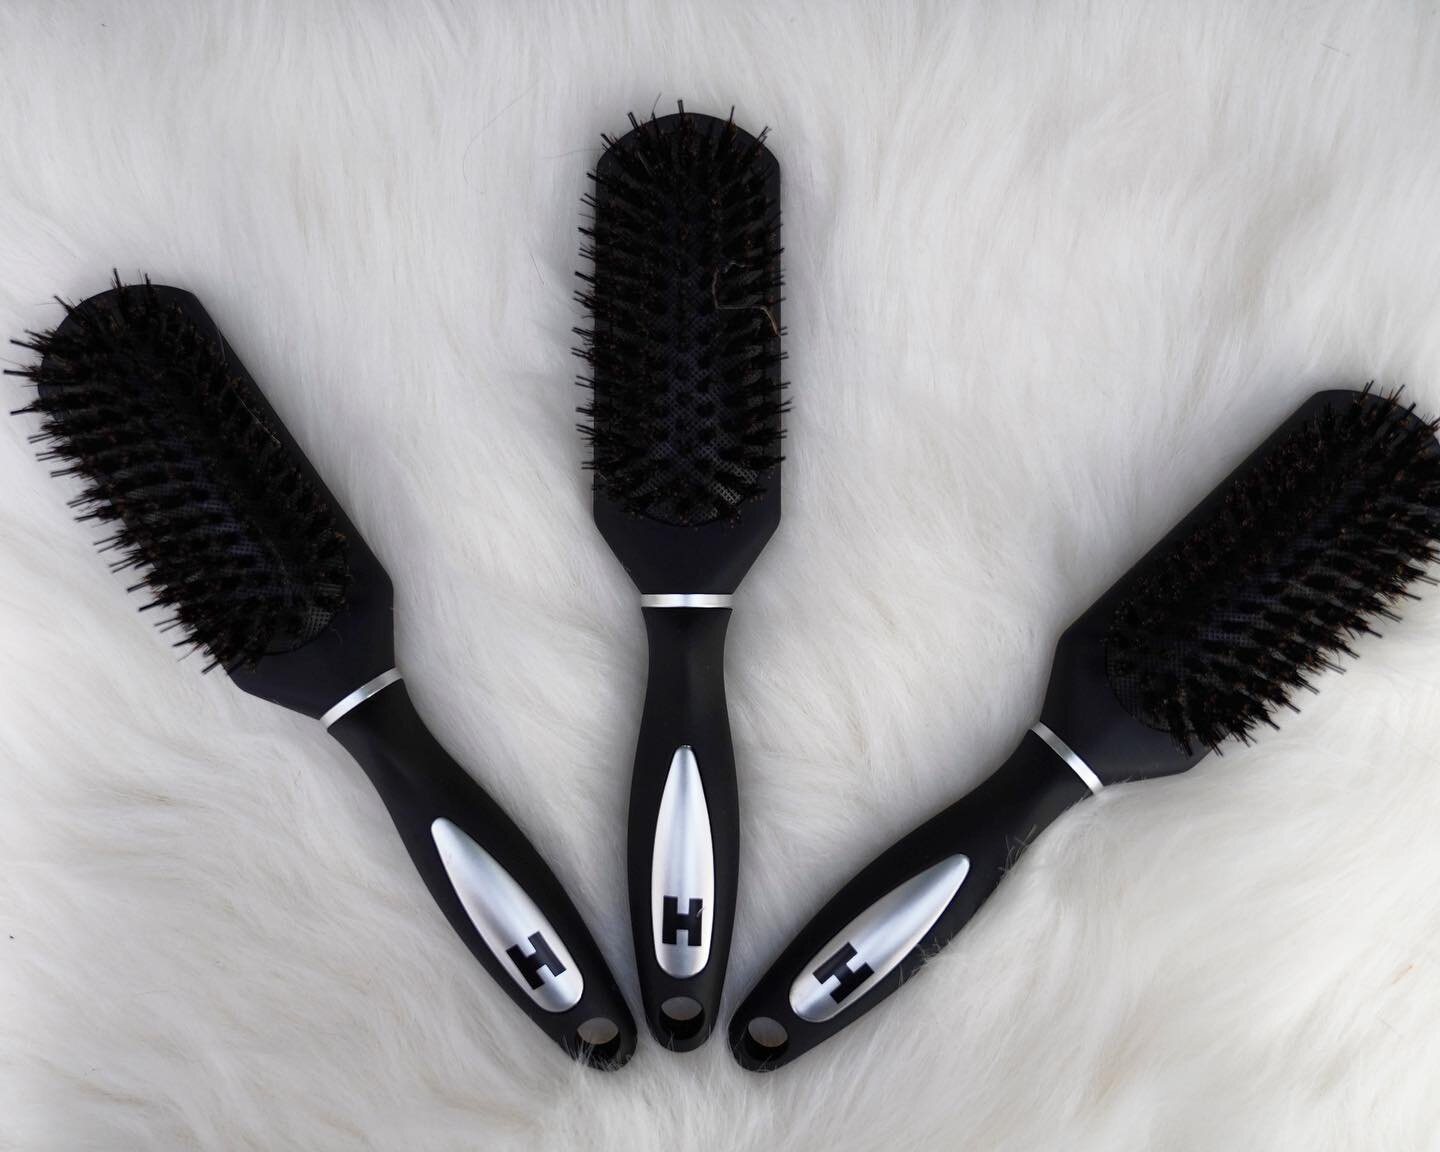 My secret weapon and the perfect  accessory to keep your extensions looking and feeling their best!
⠀⠀⠀⠀⠀⠀⠀⠀⠀
⠀⠀⠀⠀⠀⠀⠀⠀⠀
Gentler than plastic brushes and they redistribute oils throughout the hair, boosting shine. I offer this brush in two convenient 